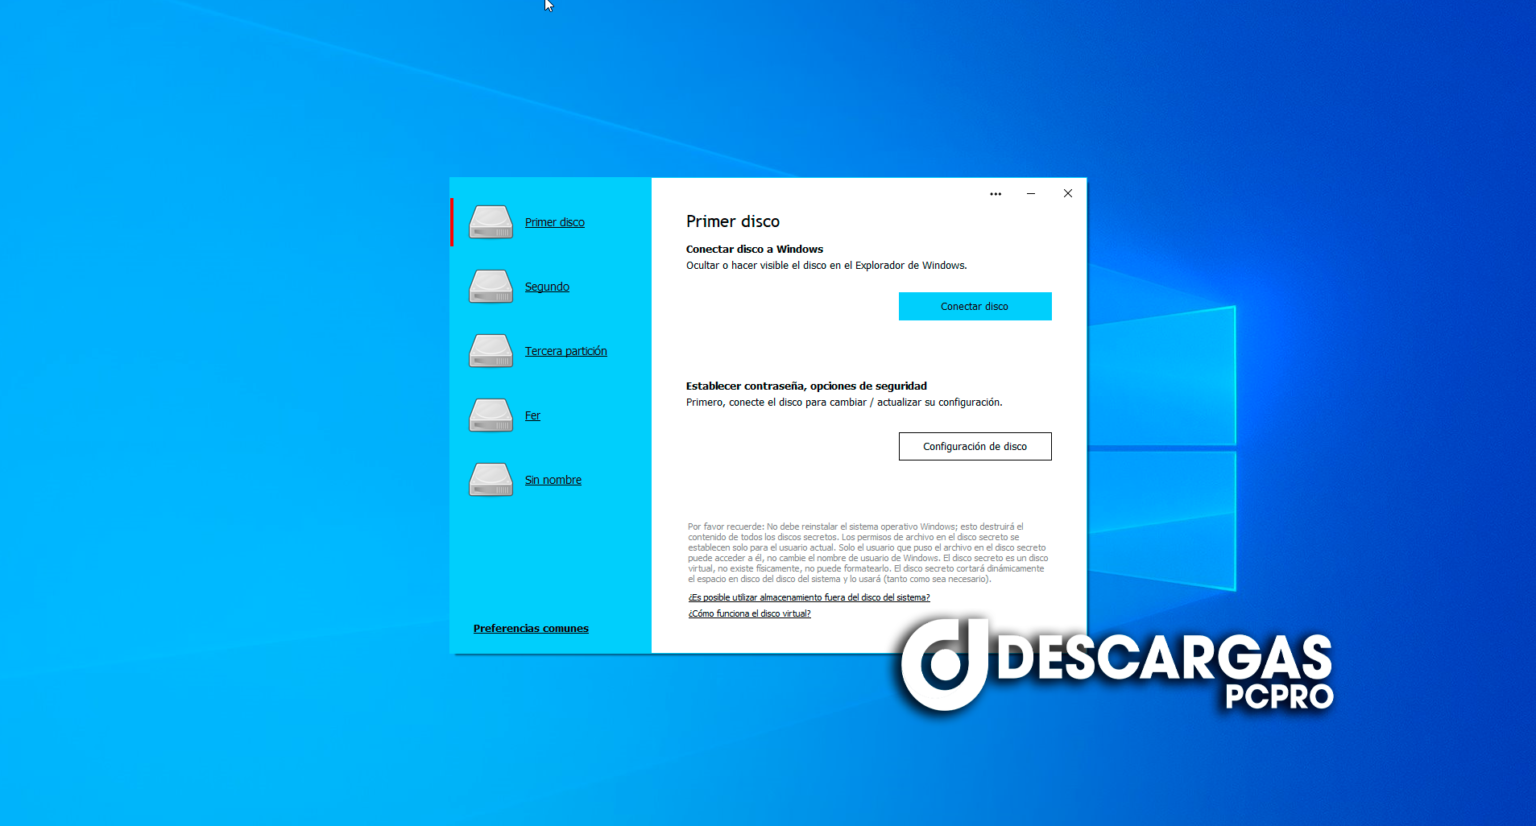 Secret Disk Professional 2023.03 download the last version for android